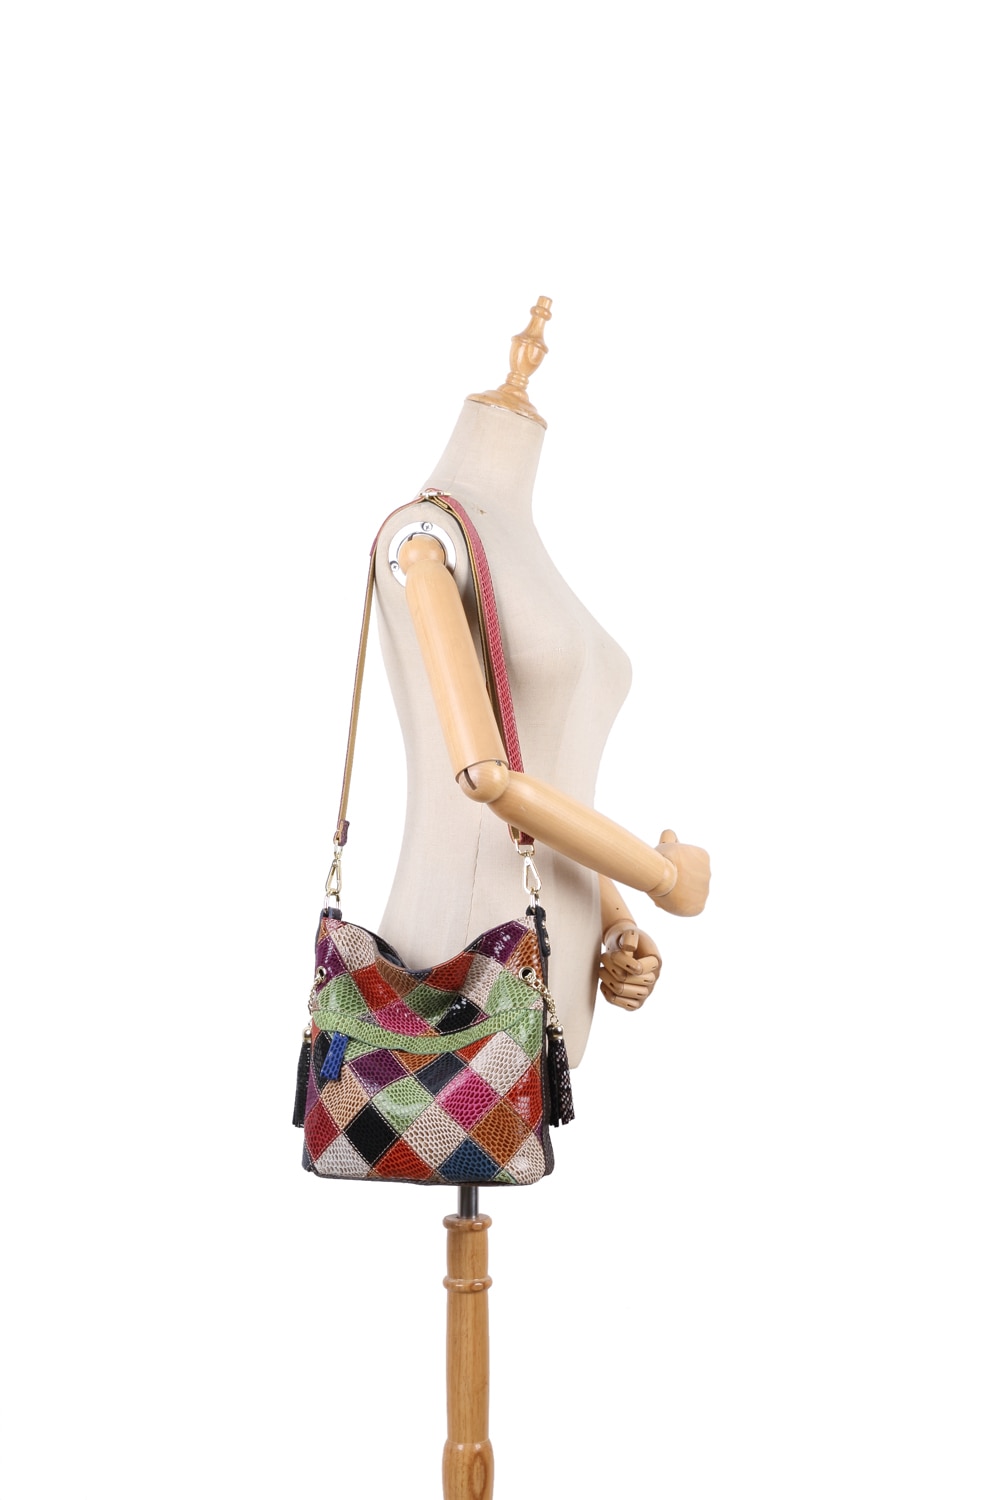 Best patchwork with cow leather handbag for lady 2020.